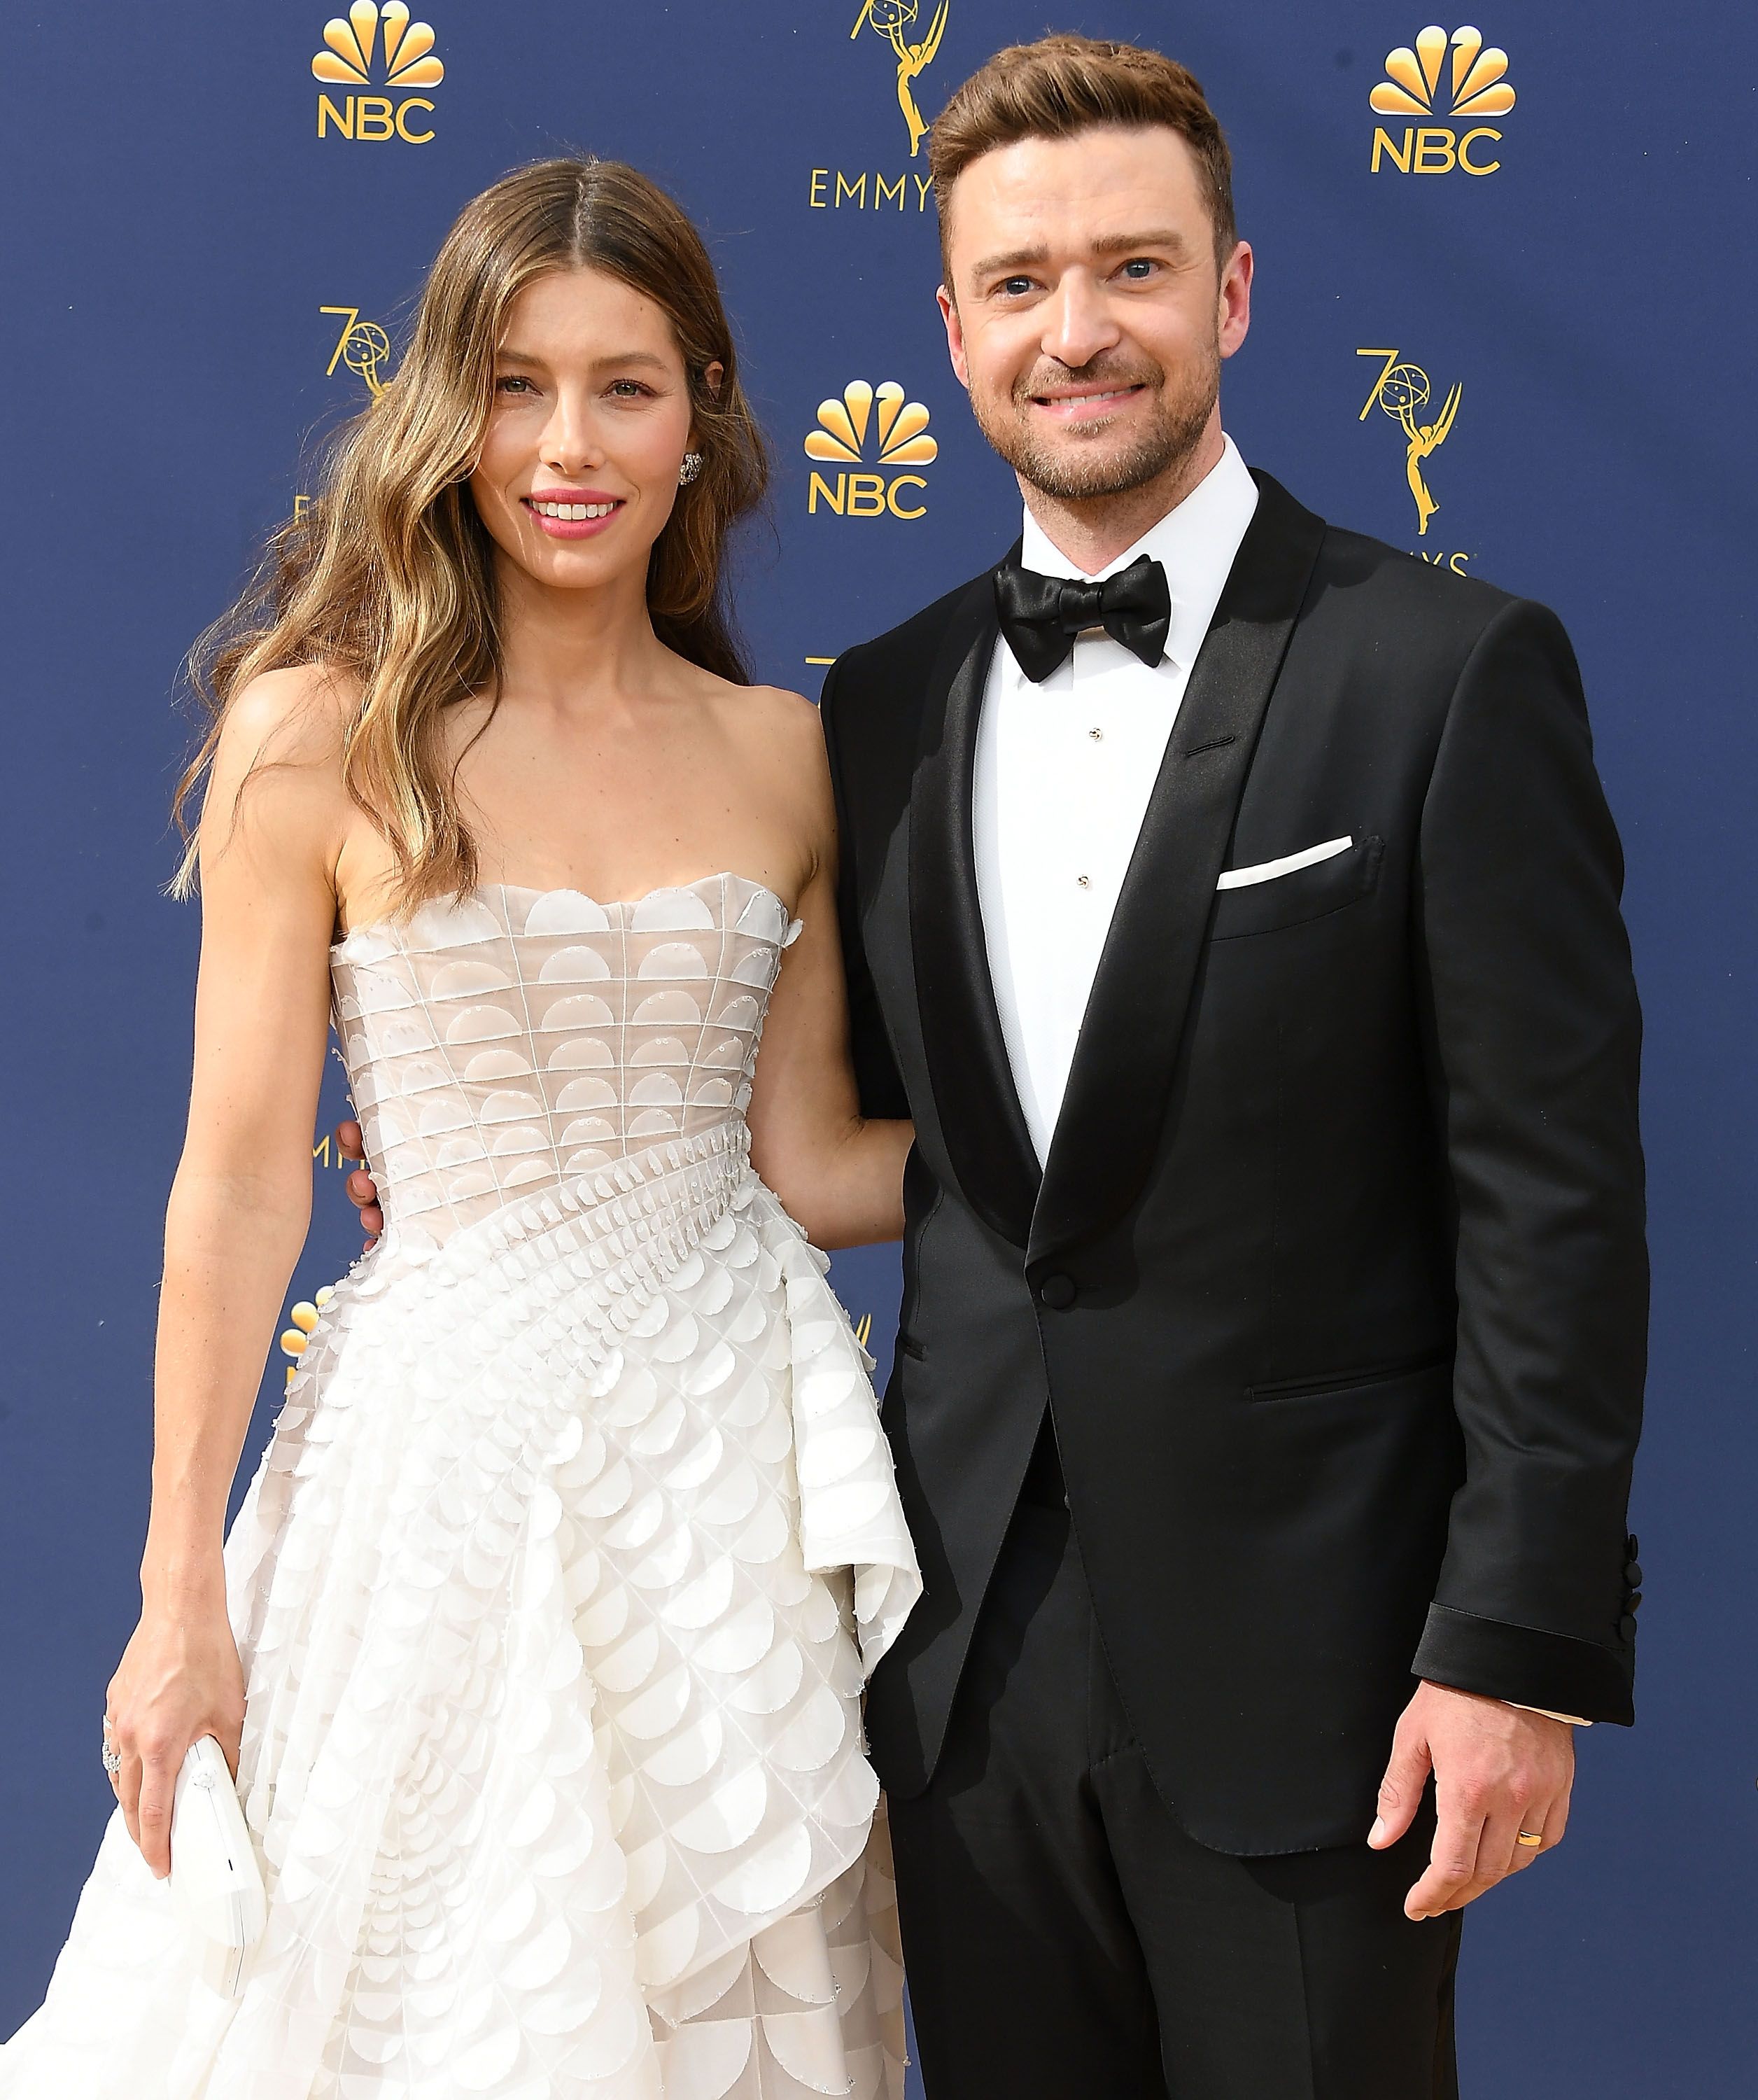 Justin Timberlake News Articles Stories And Trends For Today